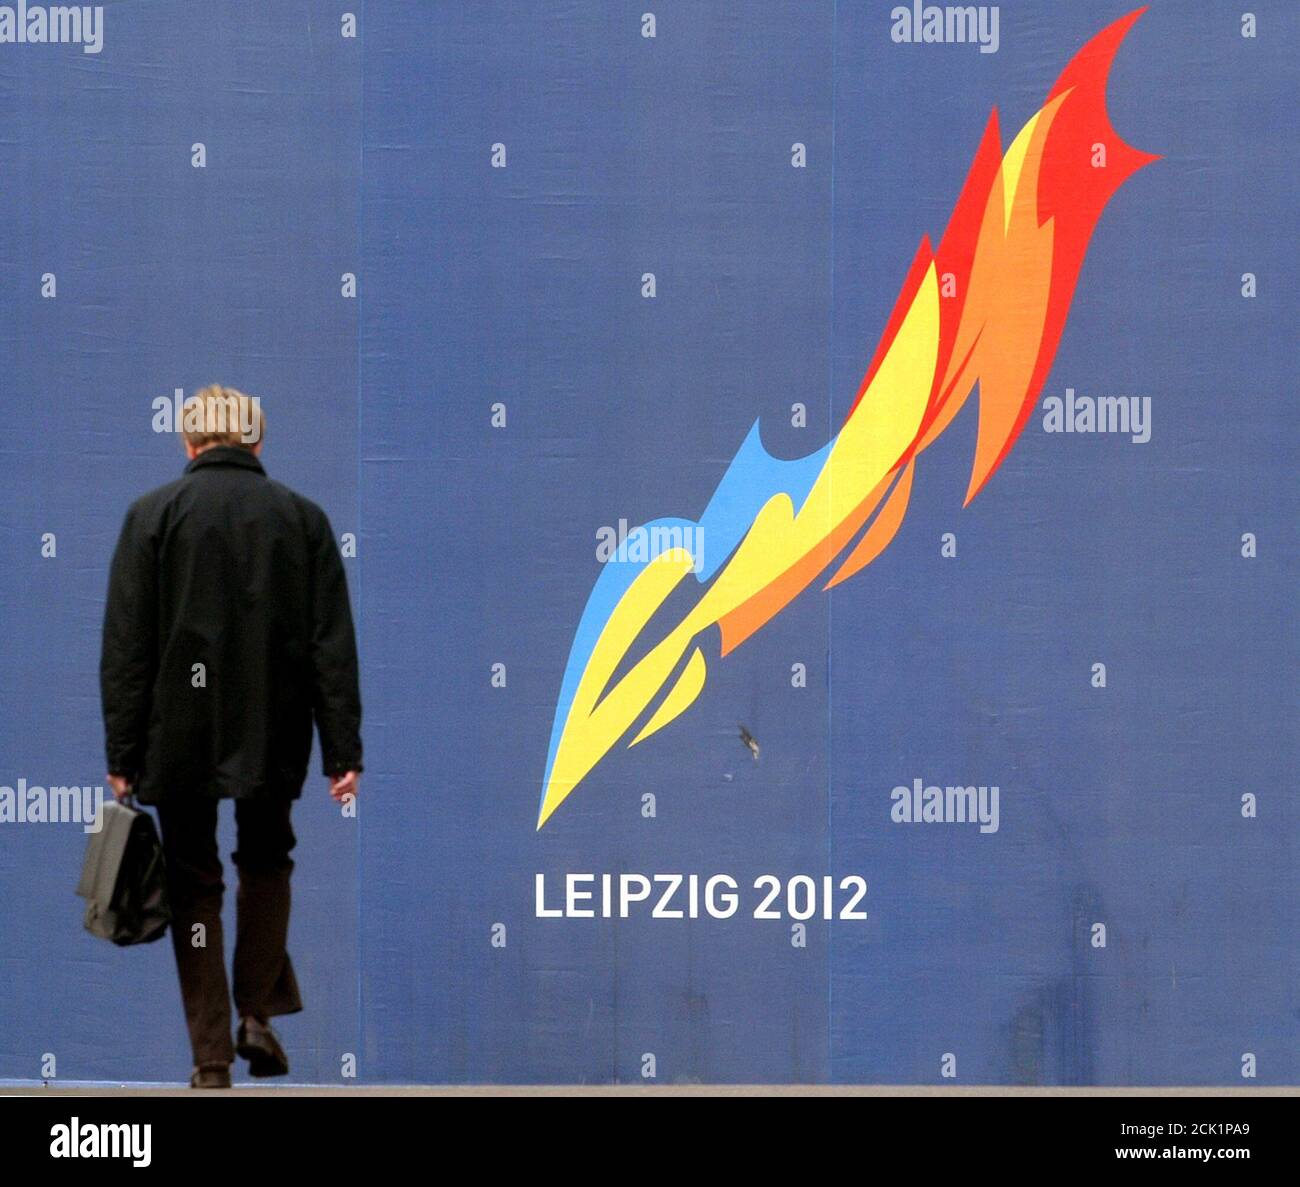 A man walks in front of an advertising poster for the city of Leipzig's application to host the 2012 Olympics in the eastern German city of Leipzig May 17, 2004. Nine cities hoping to stage the 2012 Olympic Games face a cull this week as Olympic chiefs meet to draw up a shortlist of candidates. The applicants - Havana, Istanbul, Leipzig, London, Madrid, Moscow, New York City, Paris and Rio de Janeiro - will learn their fate on Tuesday. REUTERS/Arnd Wiegmann  AKW/JOH/ACM Stock Photo